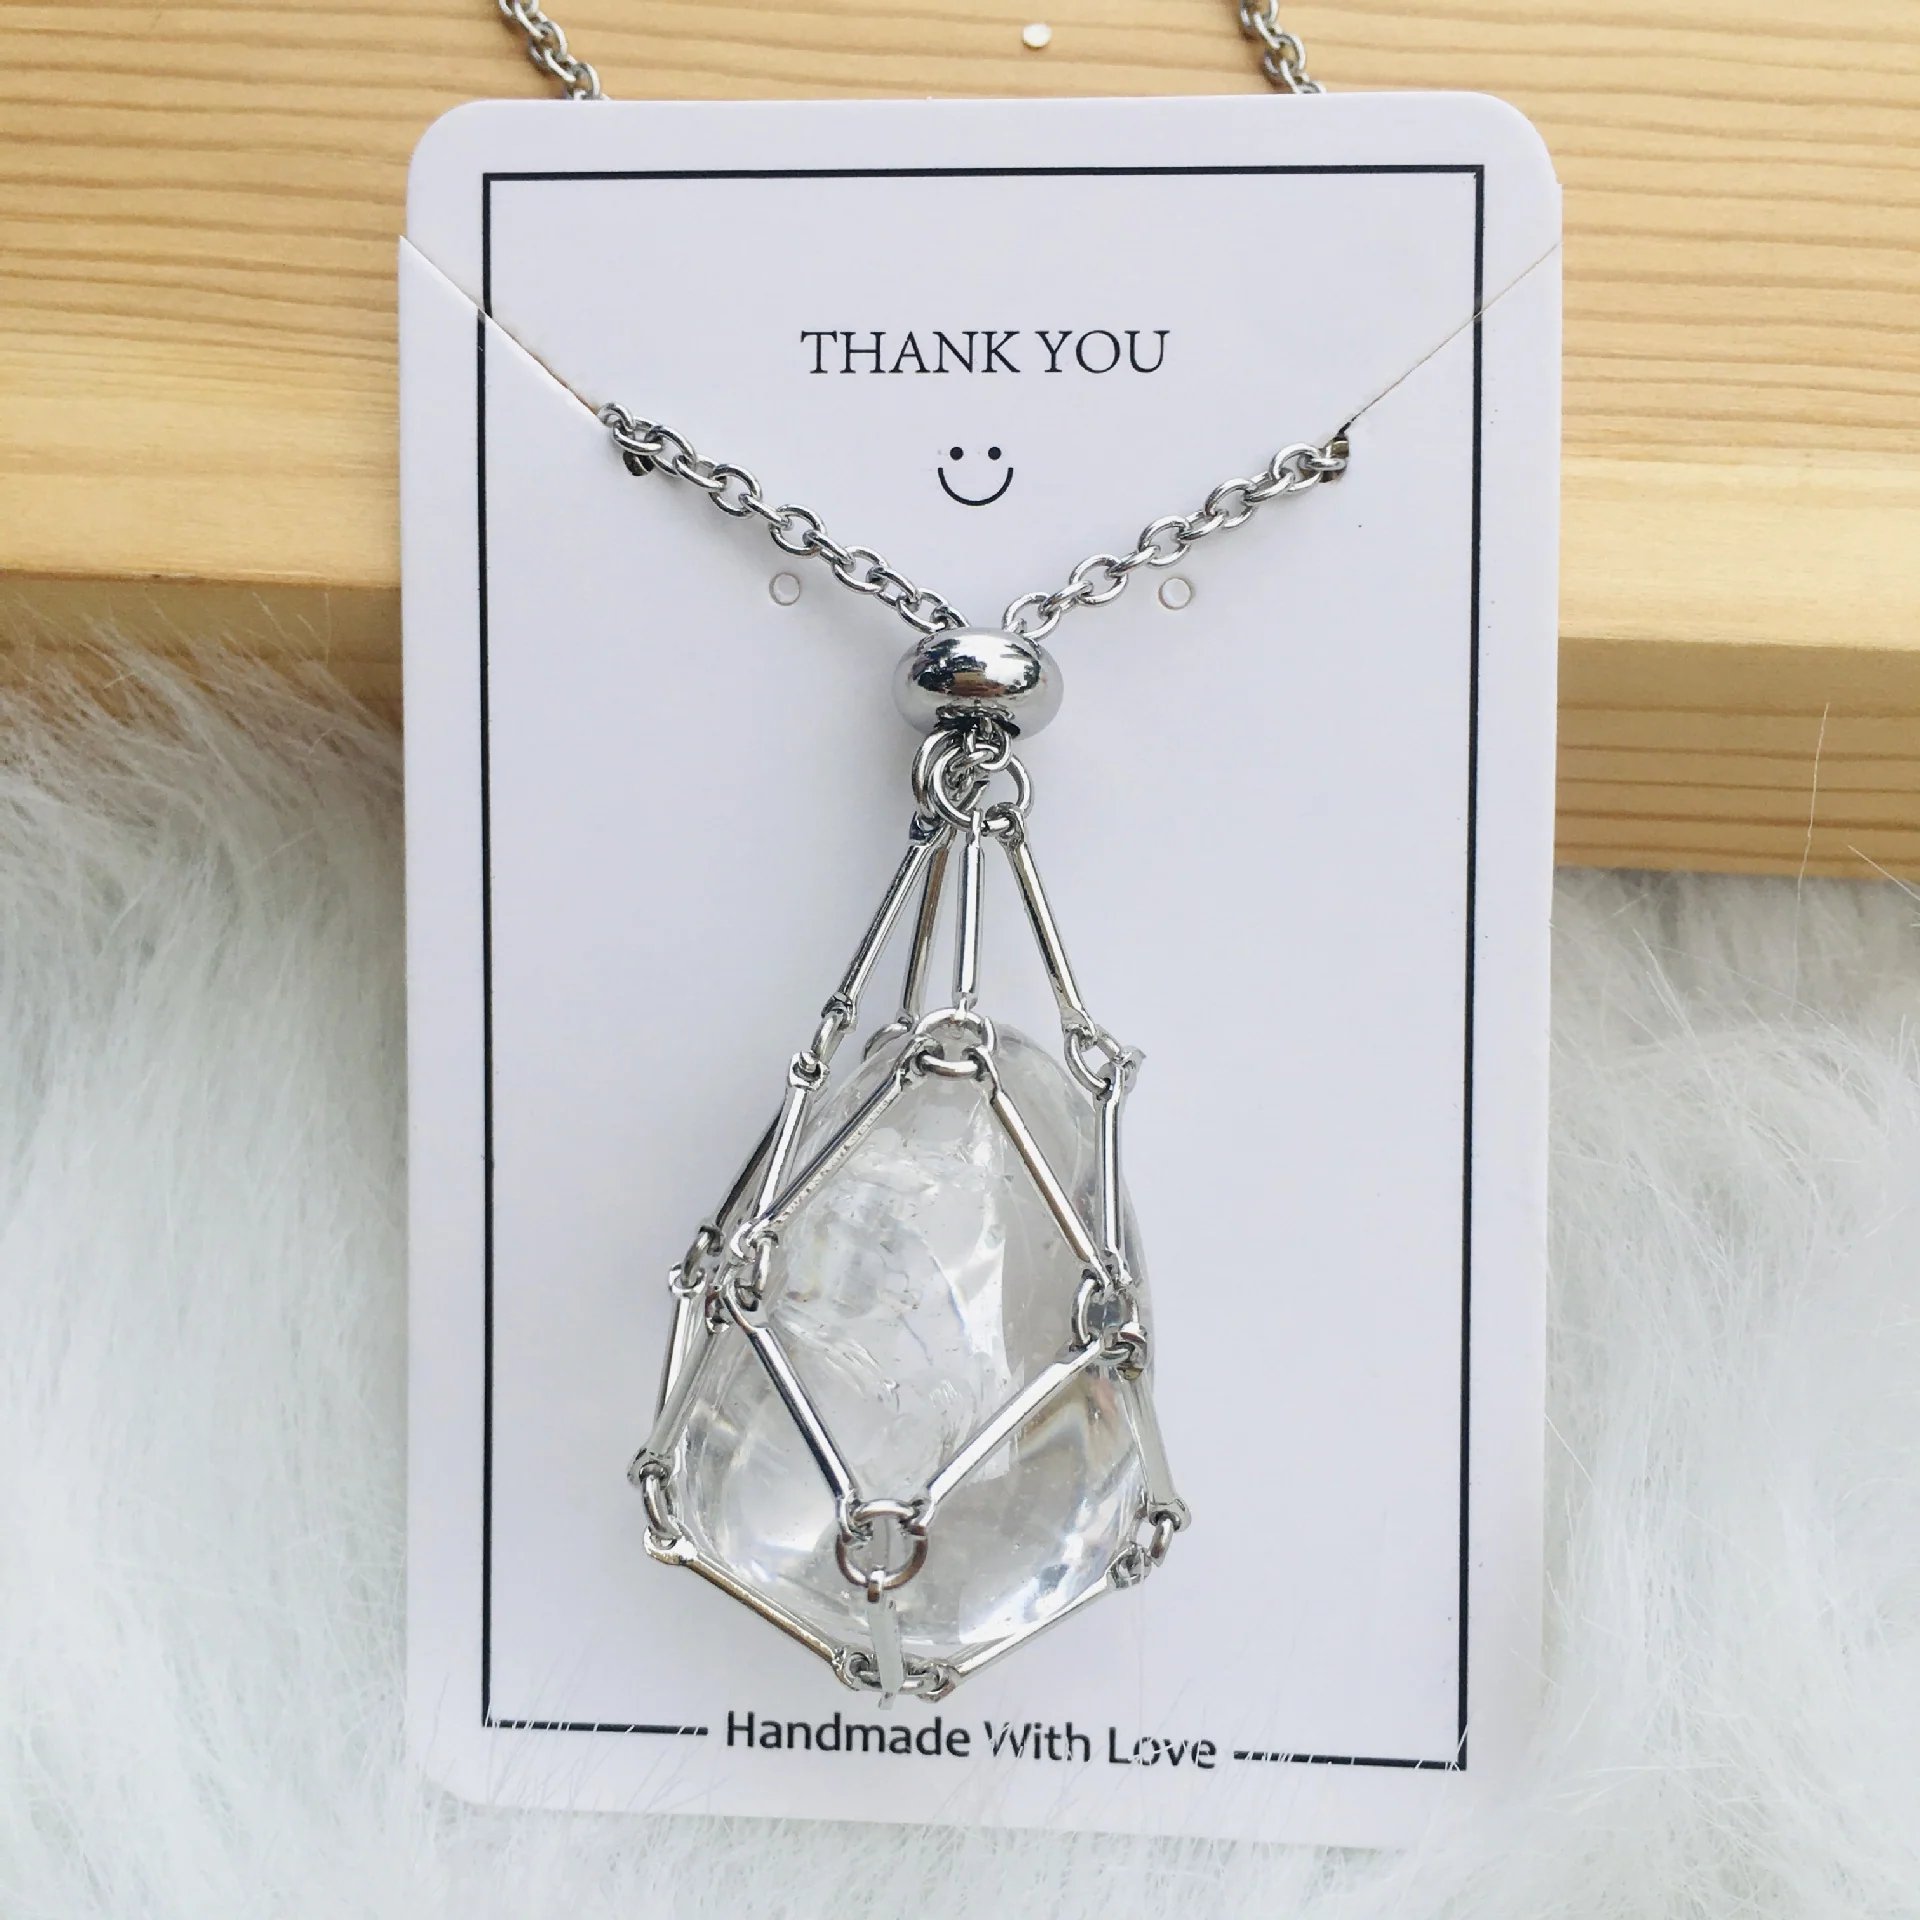 2023 Crystal Stone Holder Necklace - Free (Crystal) Gift Included🎁